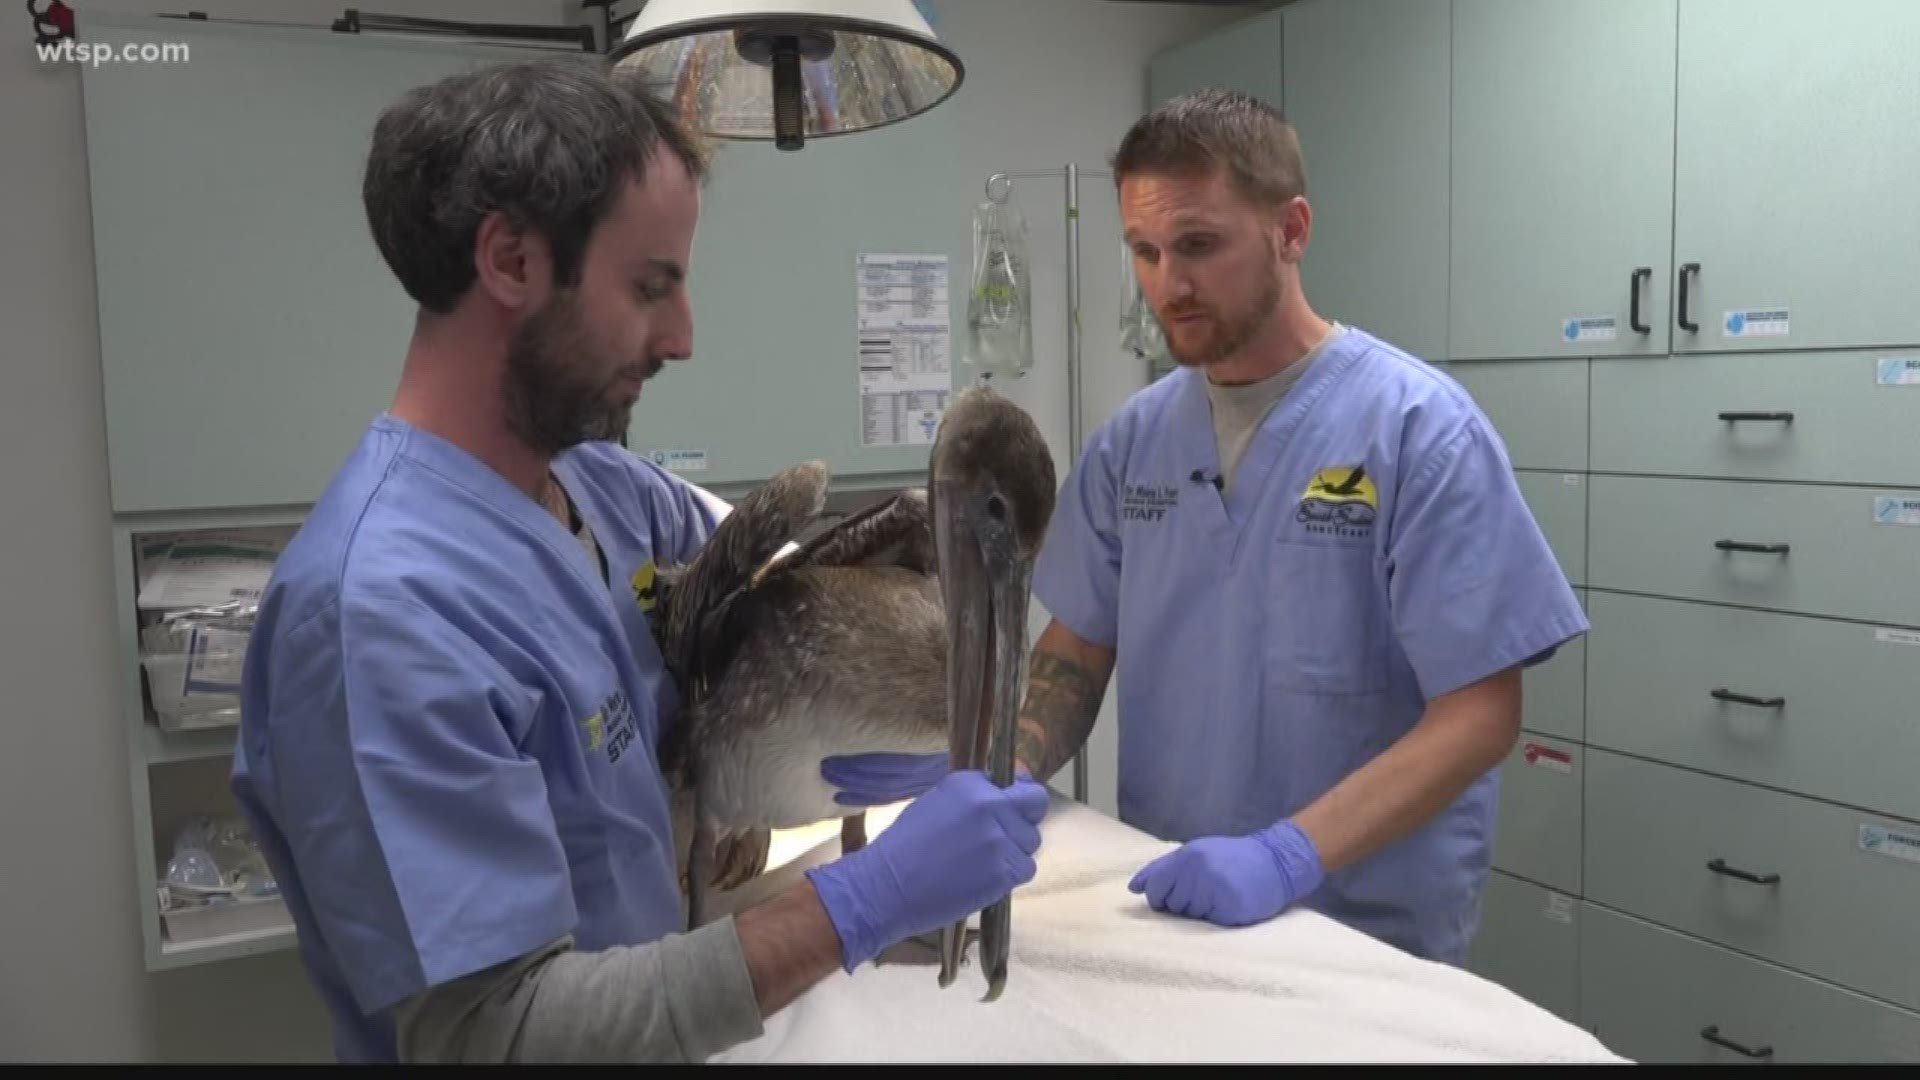 The Seaside Seabird Sanctuary rushed to rescue a pelican in St. Petersburg that seemed to be lethargic, underweight and it couldn't fly.